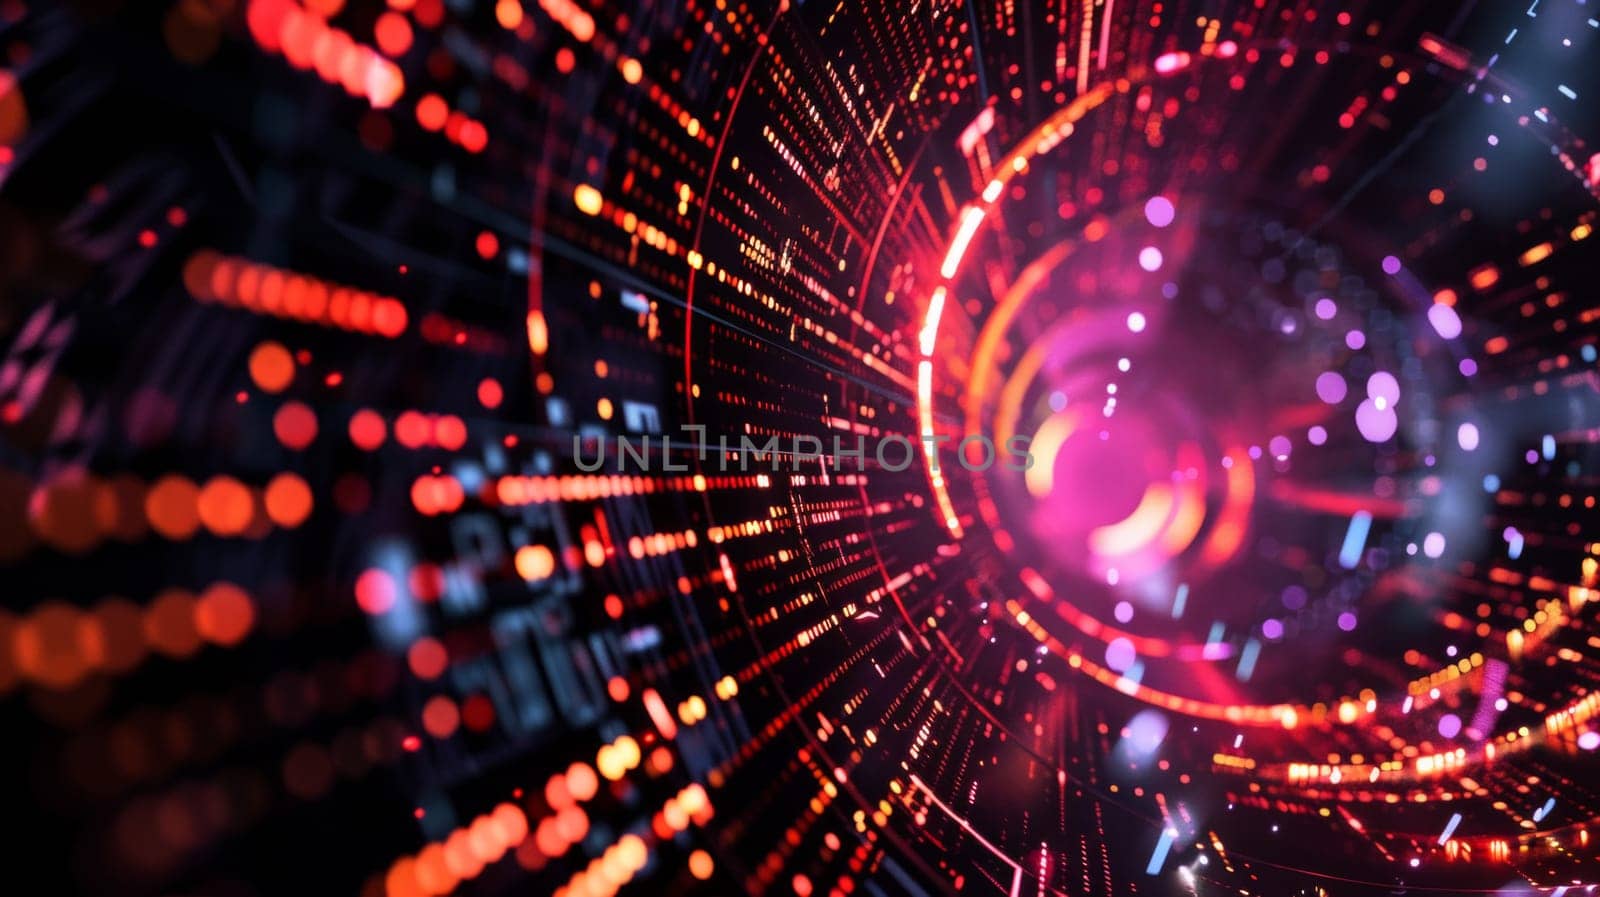 Abstract Technology Futuristic Background violet Cyberspace: Digital Tunnel with Energy Data Computer Information.